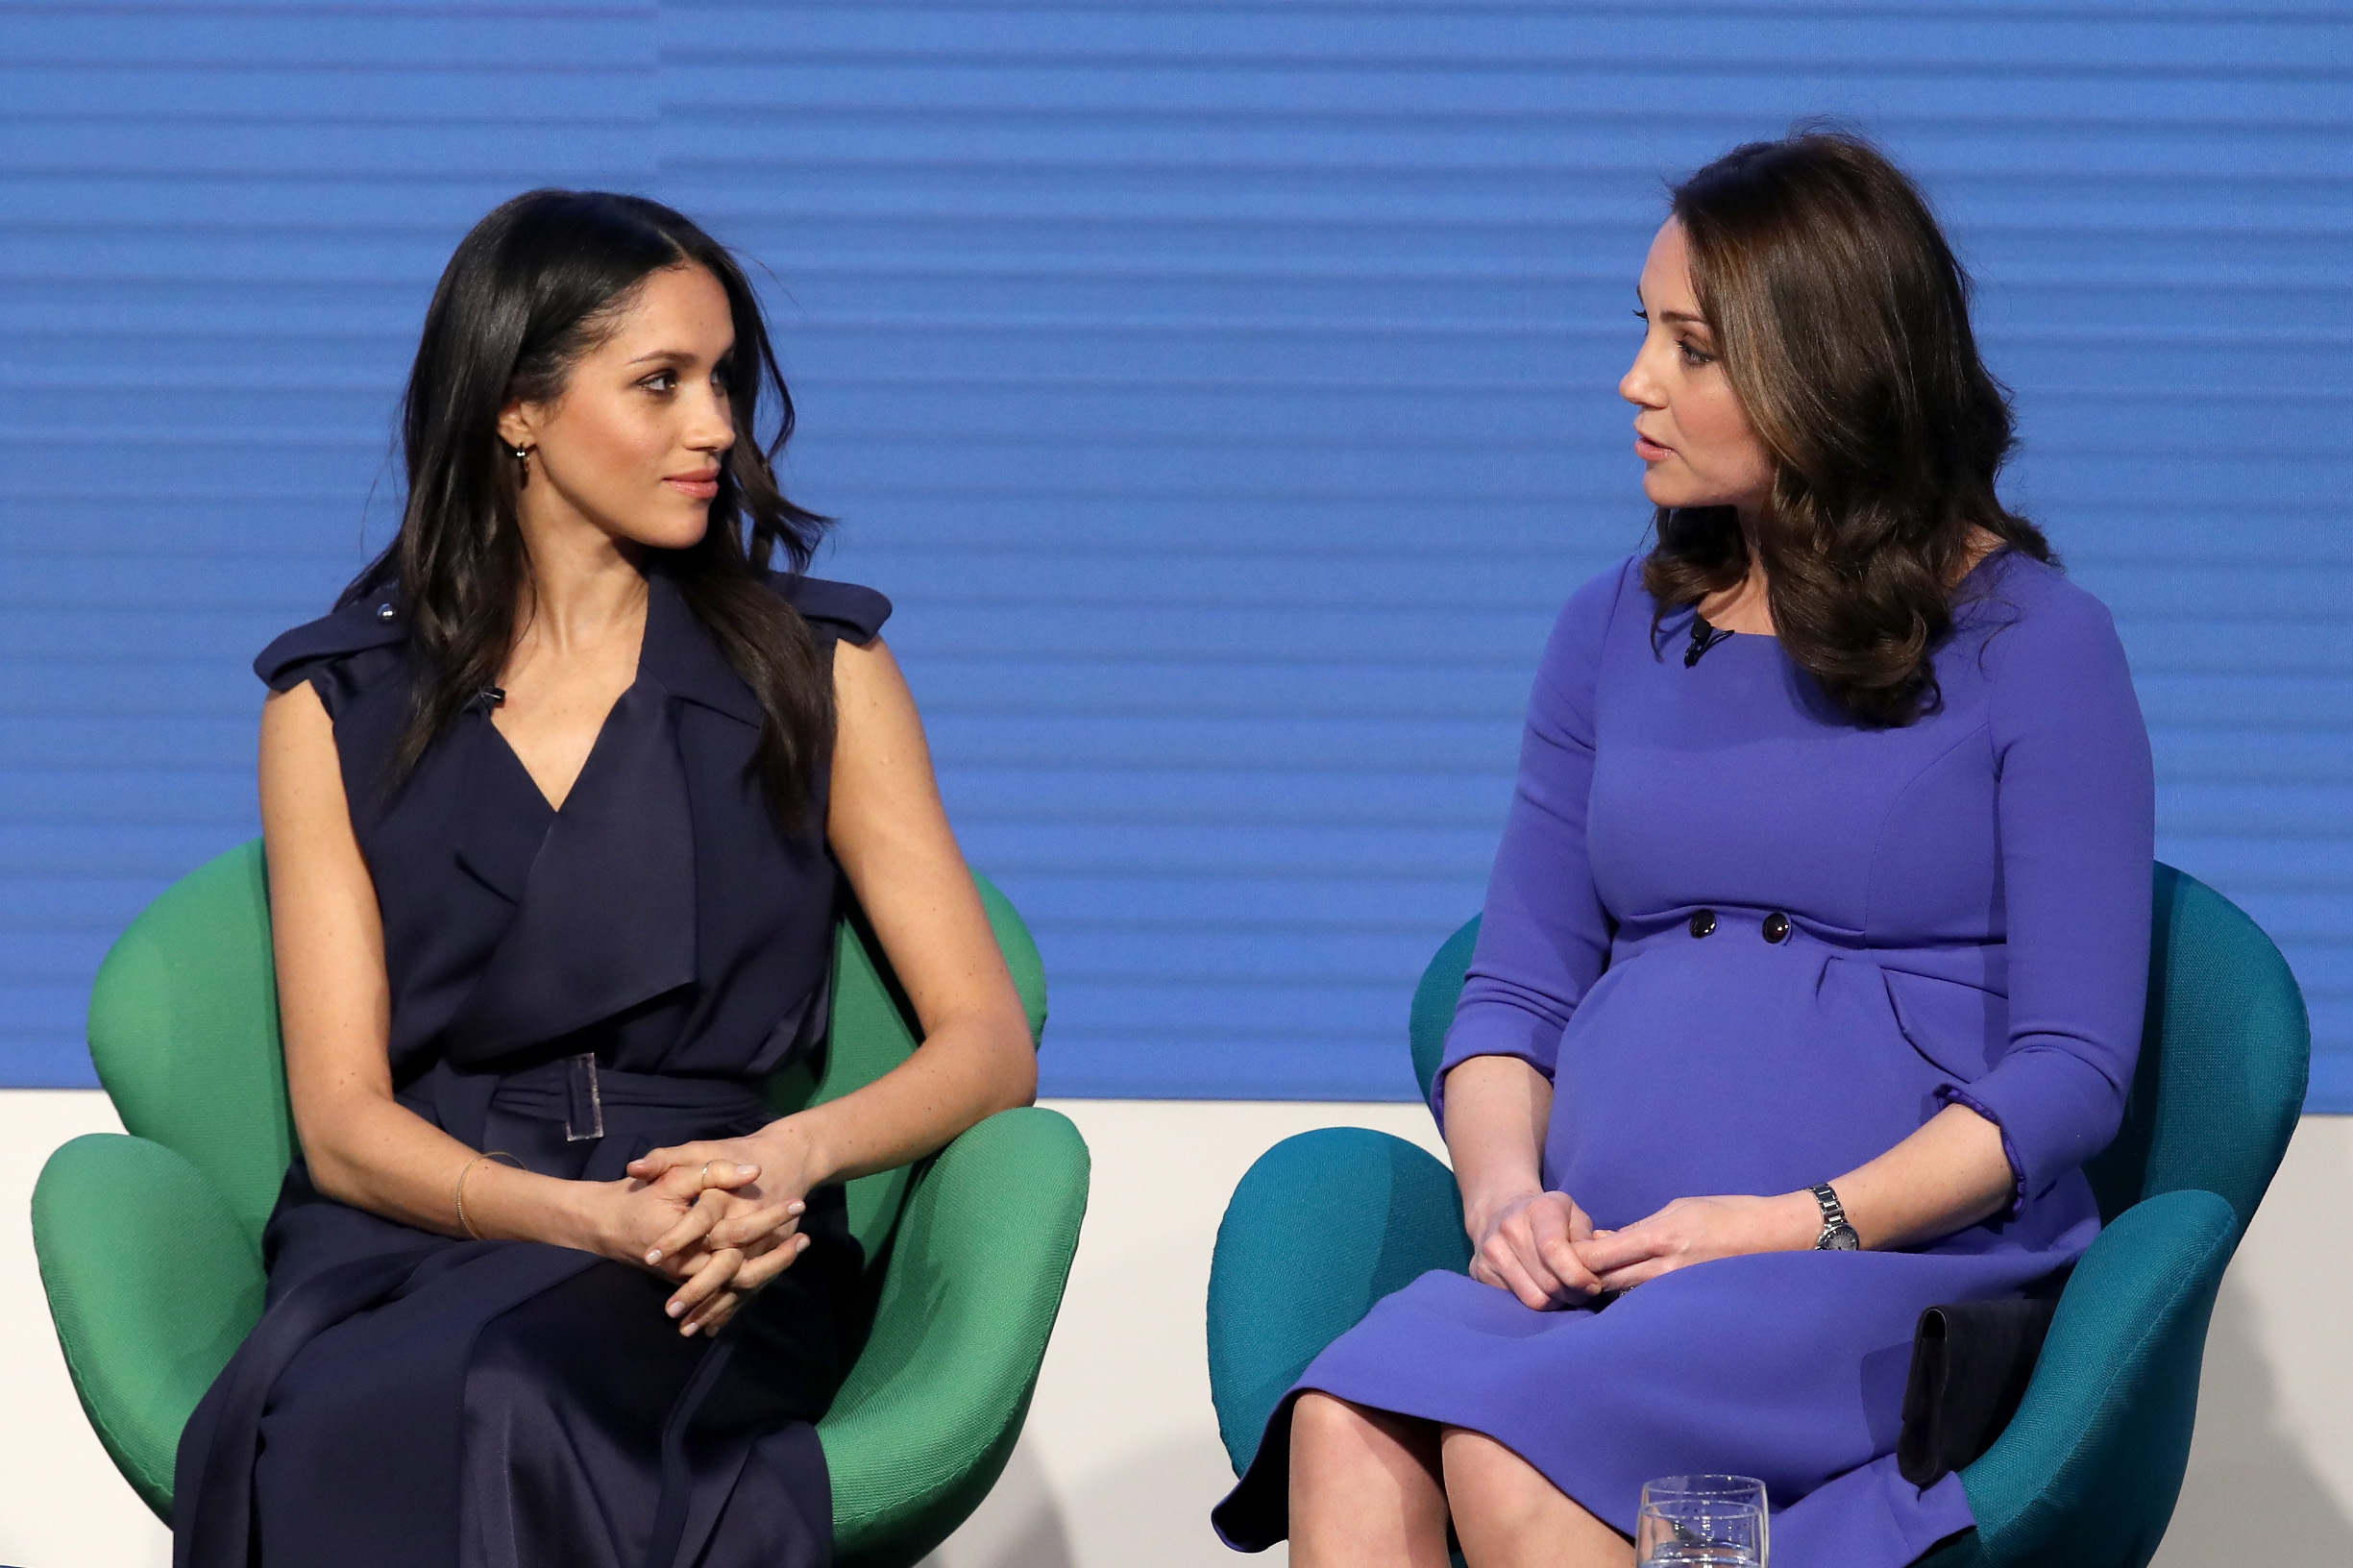 LONDON, ENGLAND - FEBRUARY 28:  (L-R) Meghan Markle and Catherine, Duchess of Cambridge attend the first annual Royal Foundation Forum held at Aviva on February 28, 2018 in London, England. Under the theme 'Making a Difference Together', the event will showcase the programmes run or initiated by The Royal Foundation.  (Photo by Chris Jackson - WPA Pool/Getty Images)